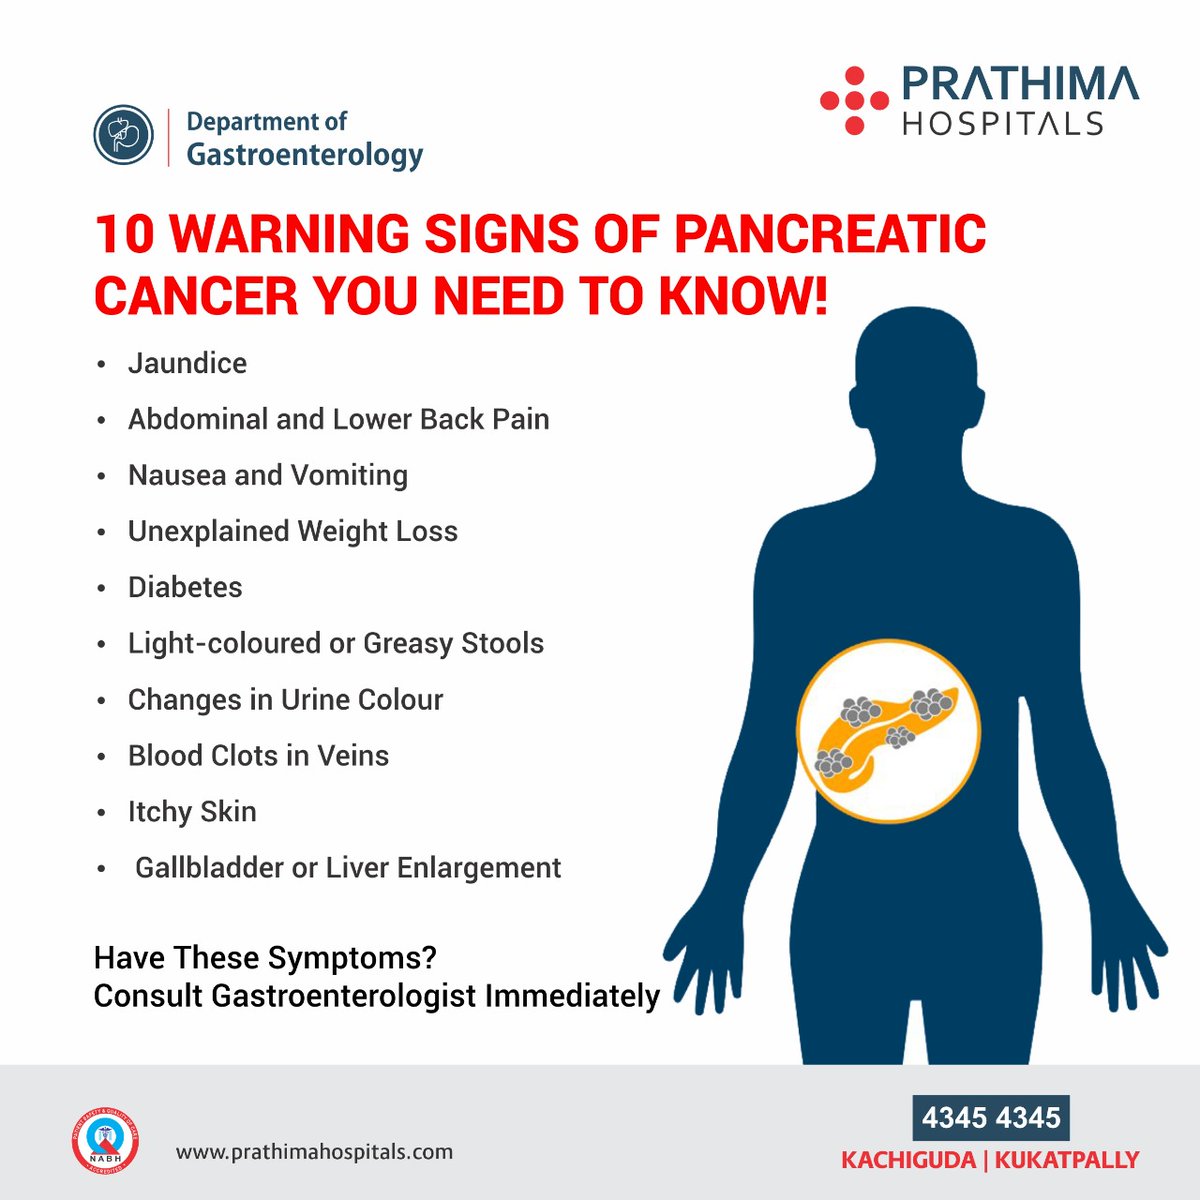 Keeping an eye on the warning sign is always a good thing. Here we've mentioned some warning signs of Pancreatic Cancer that everyone should look after. 

#PancreaticCancer #PancreaticSymptoms #PancreaticCancerSymptoms #Cancer #Gastroenterology #Health #PrathimaHospitals